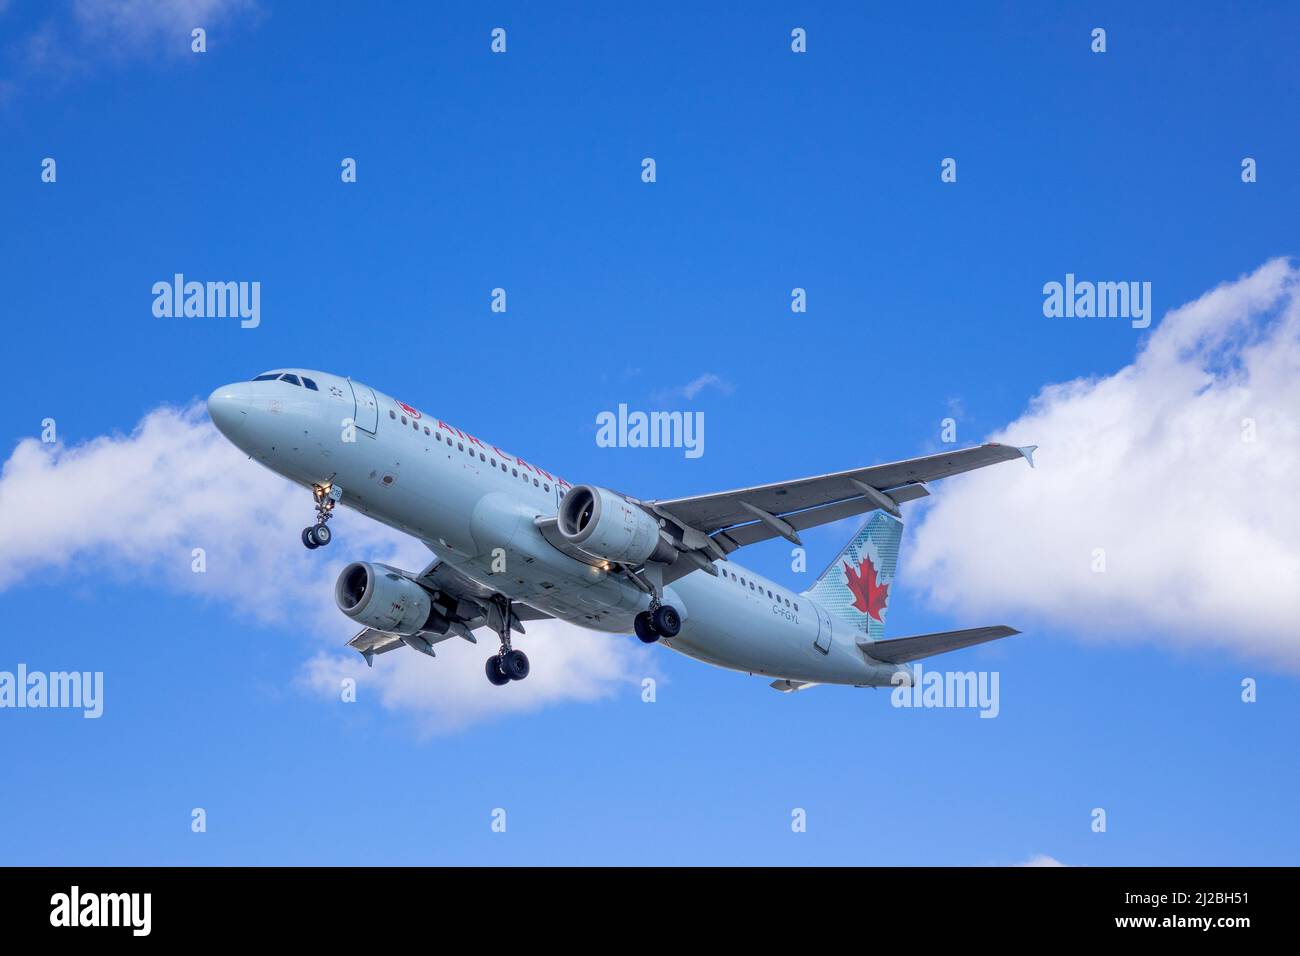 Air Canada Airbus A320-211 C-FGYL Landing At Toronto International Airport Canada Old Livery Stock Photo